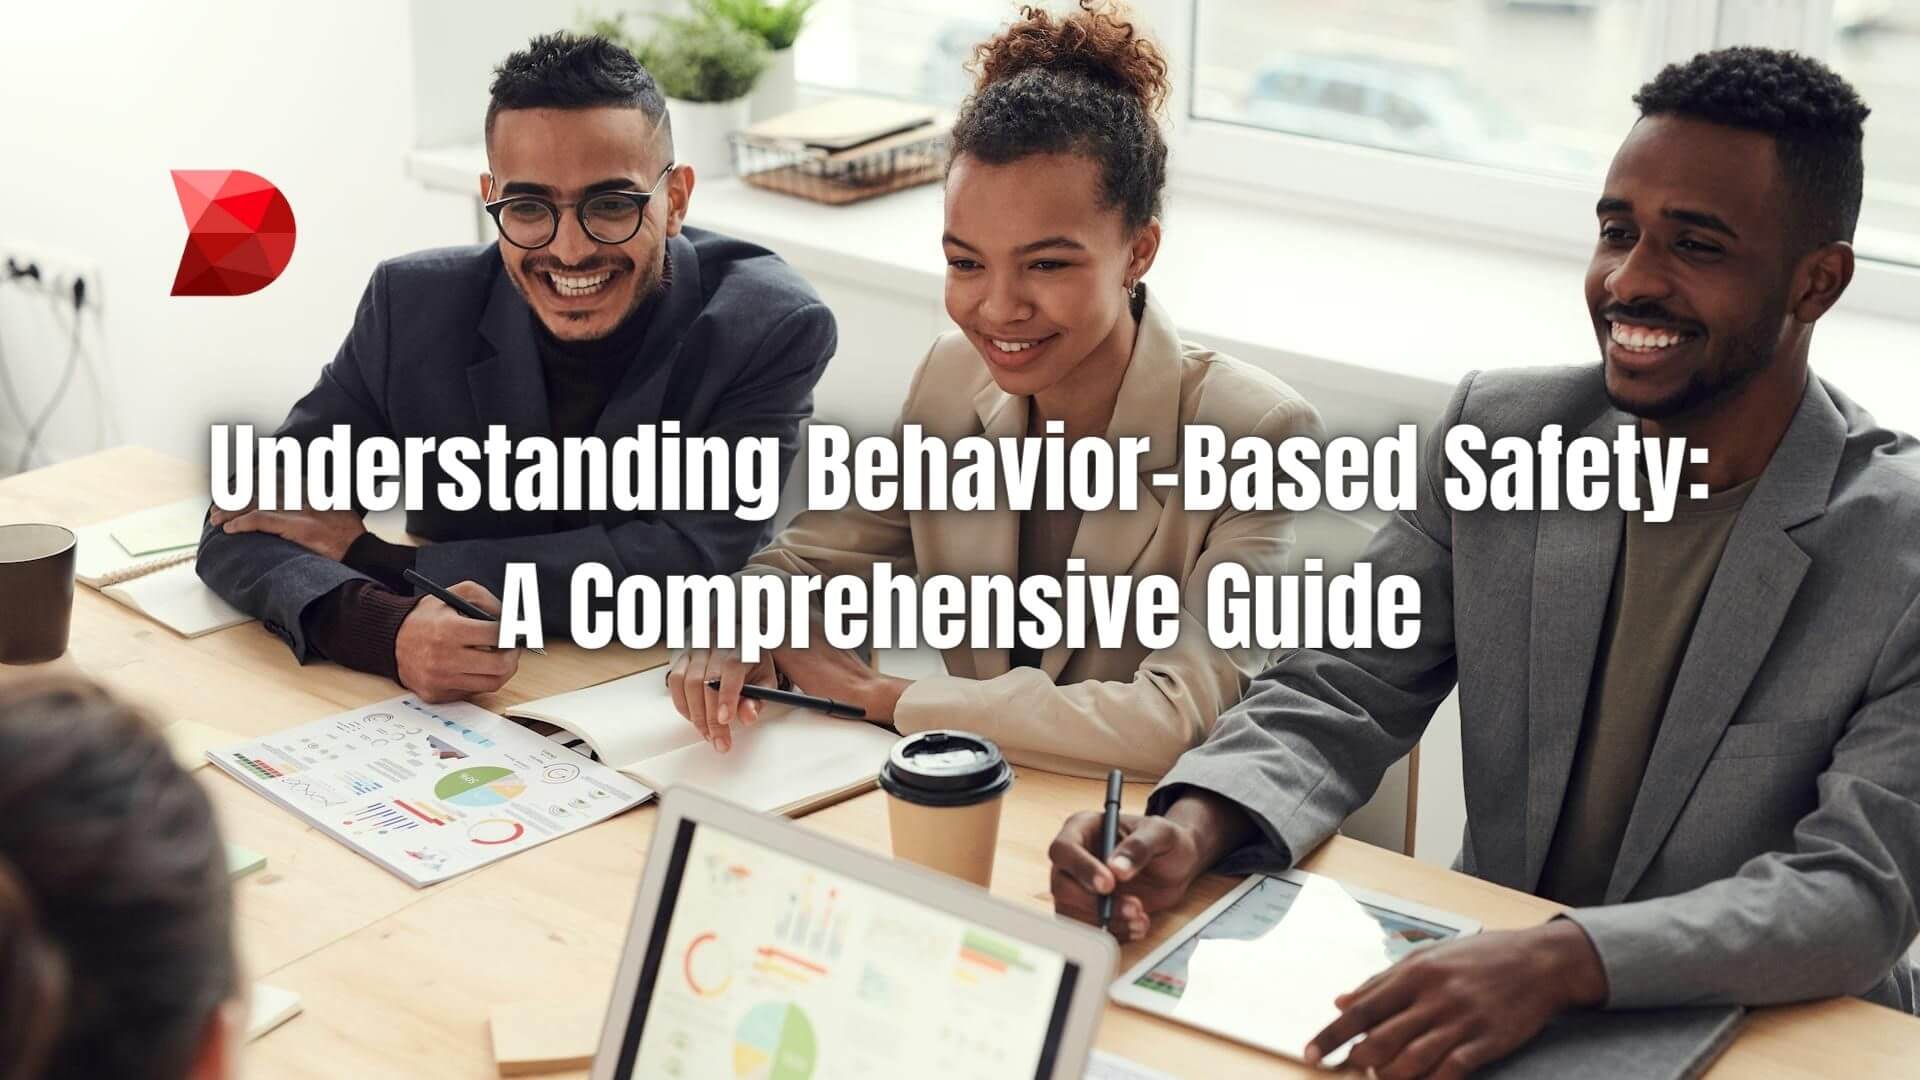 Unlock the power of behavior-based safety programs with our complete guide. Learn proven strategies to enhance workplace safety and culture.